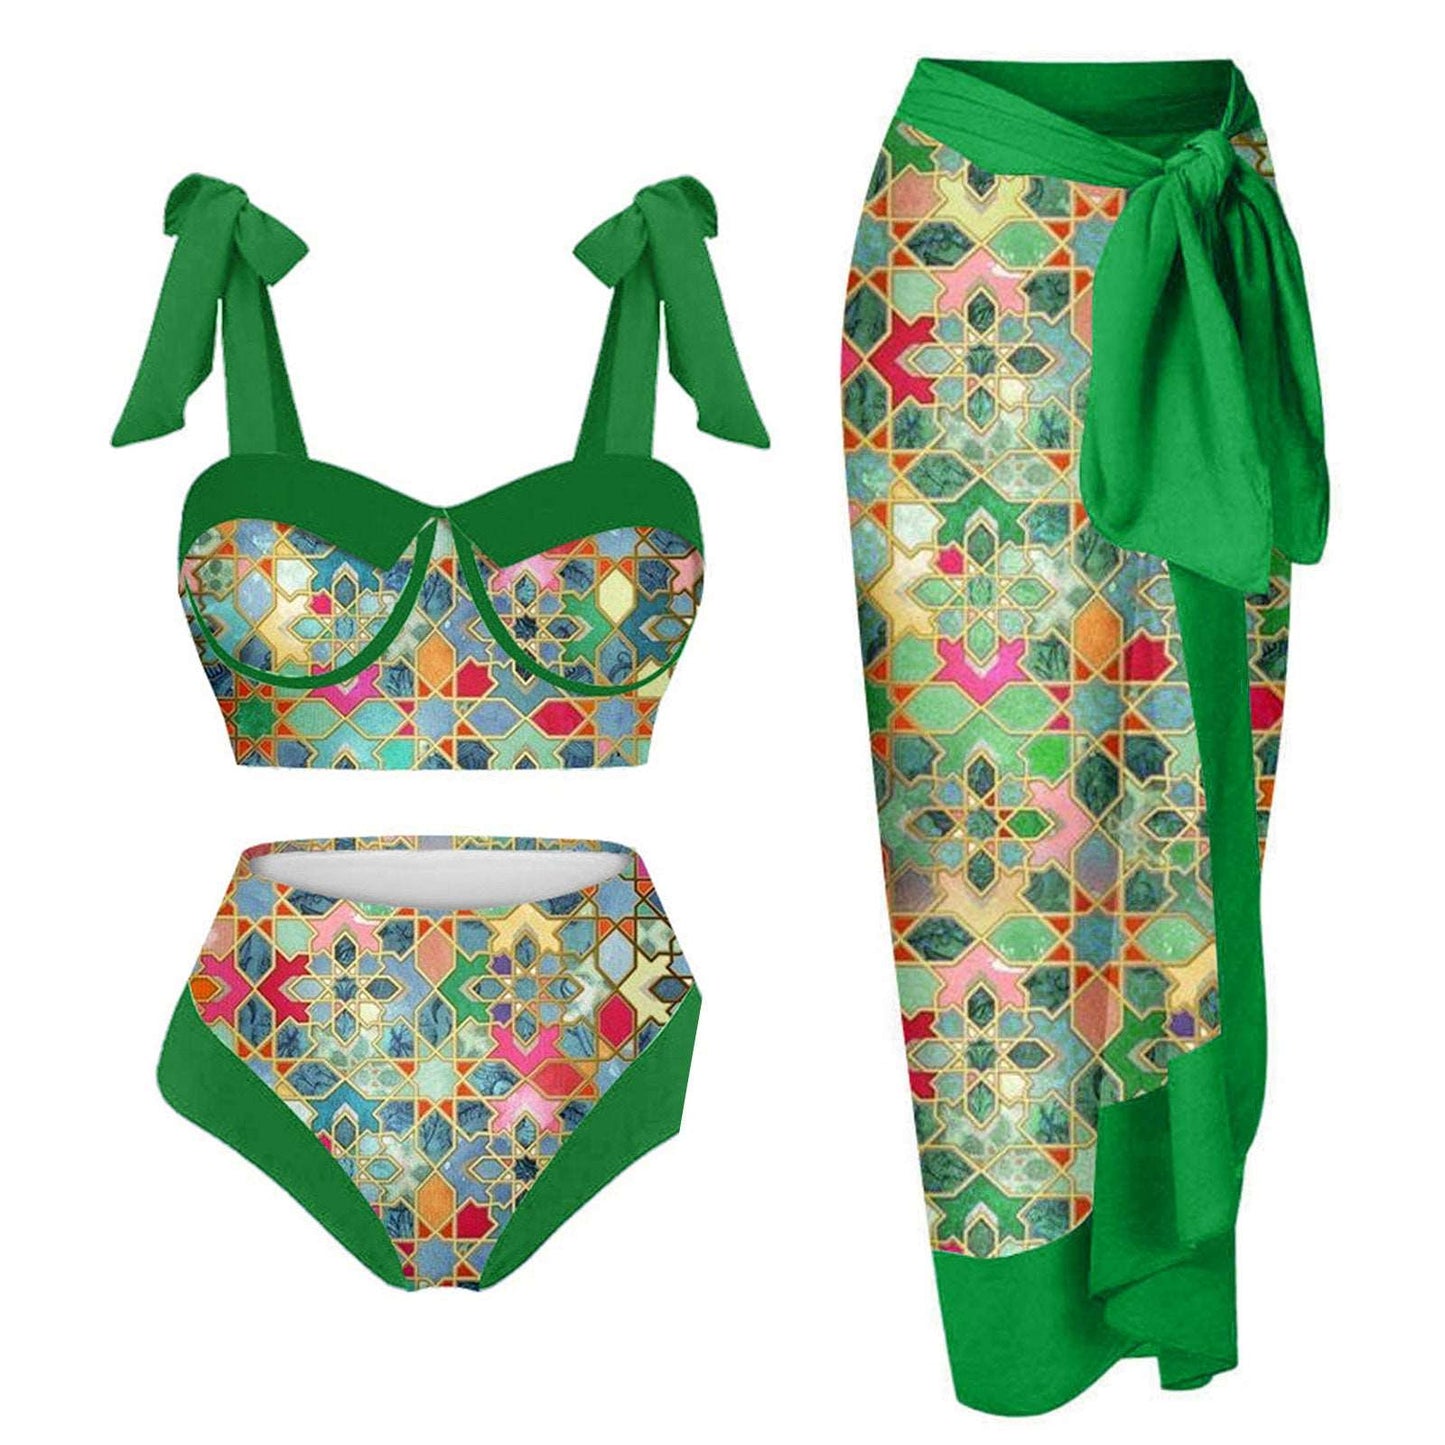 Women's Two-piece Swimsuit and Cover Scarf Set